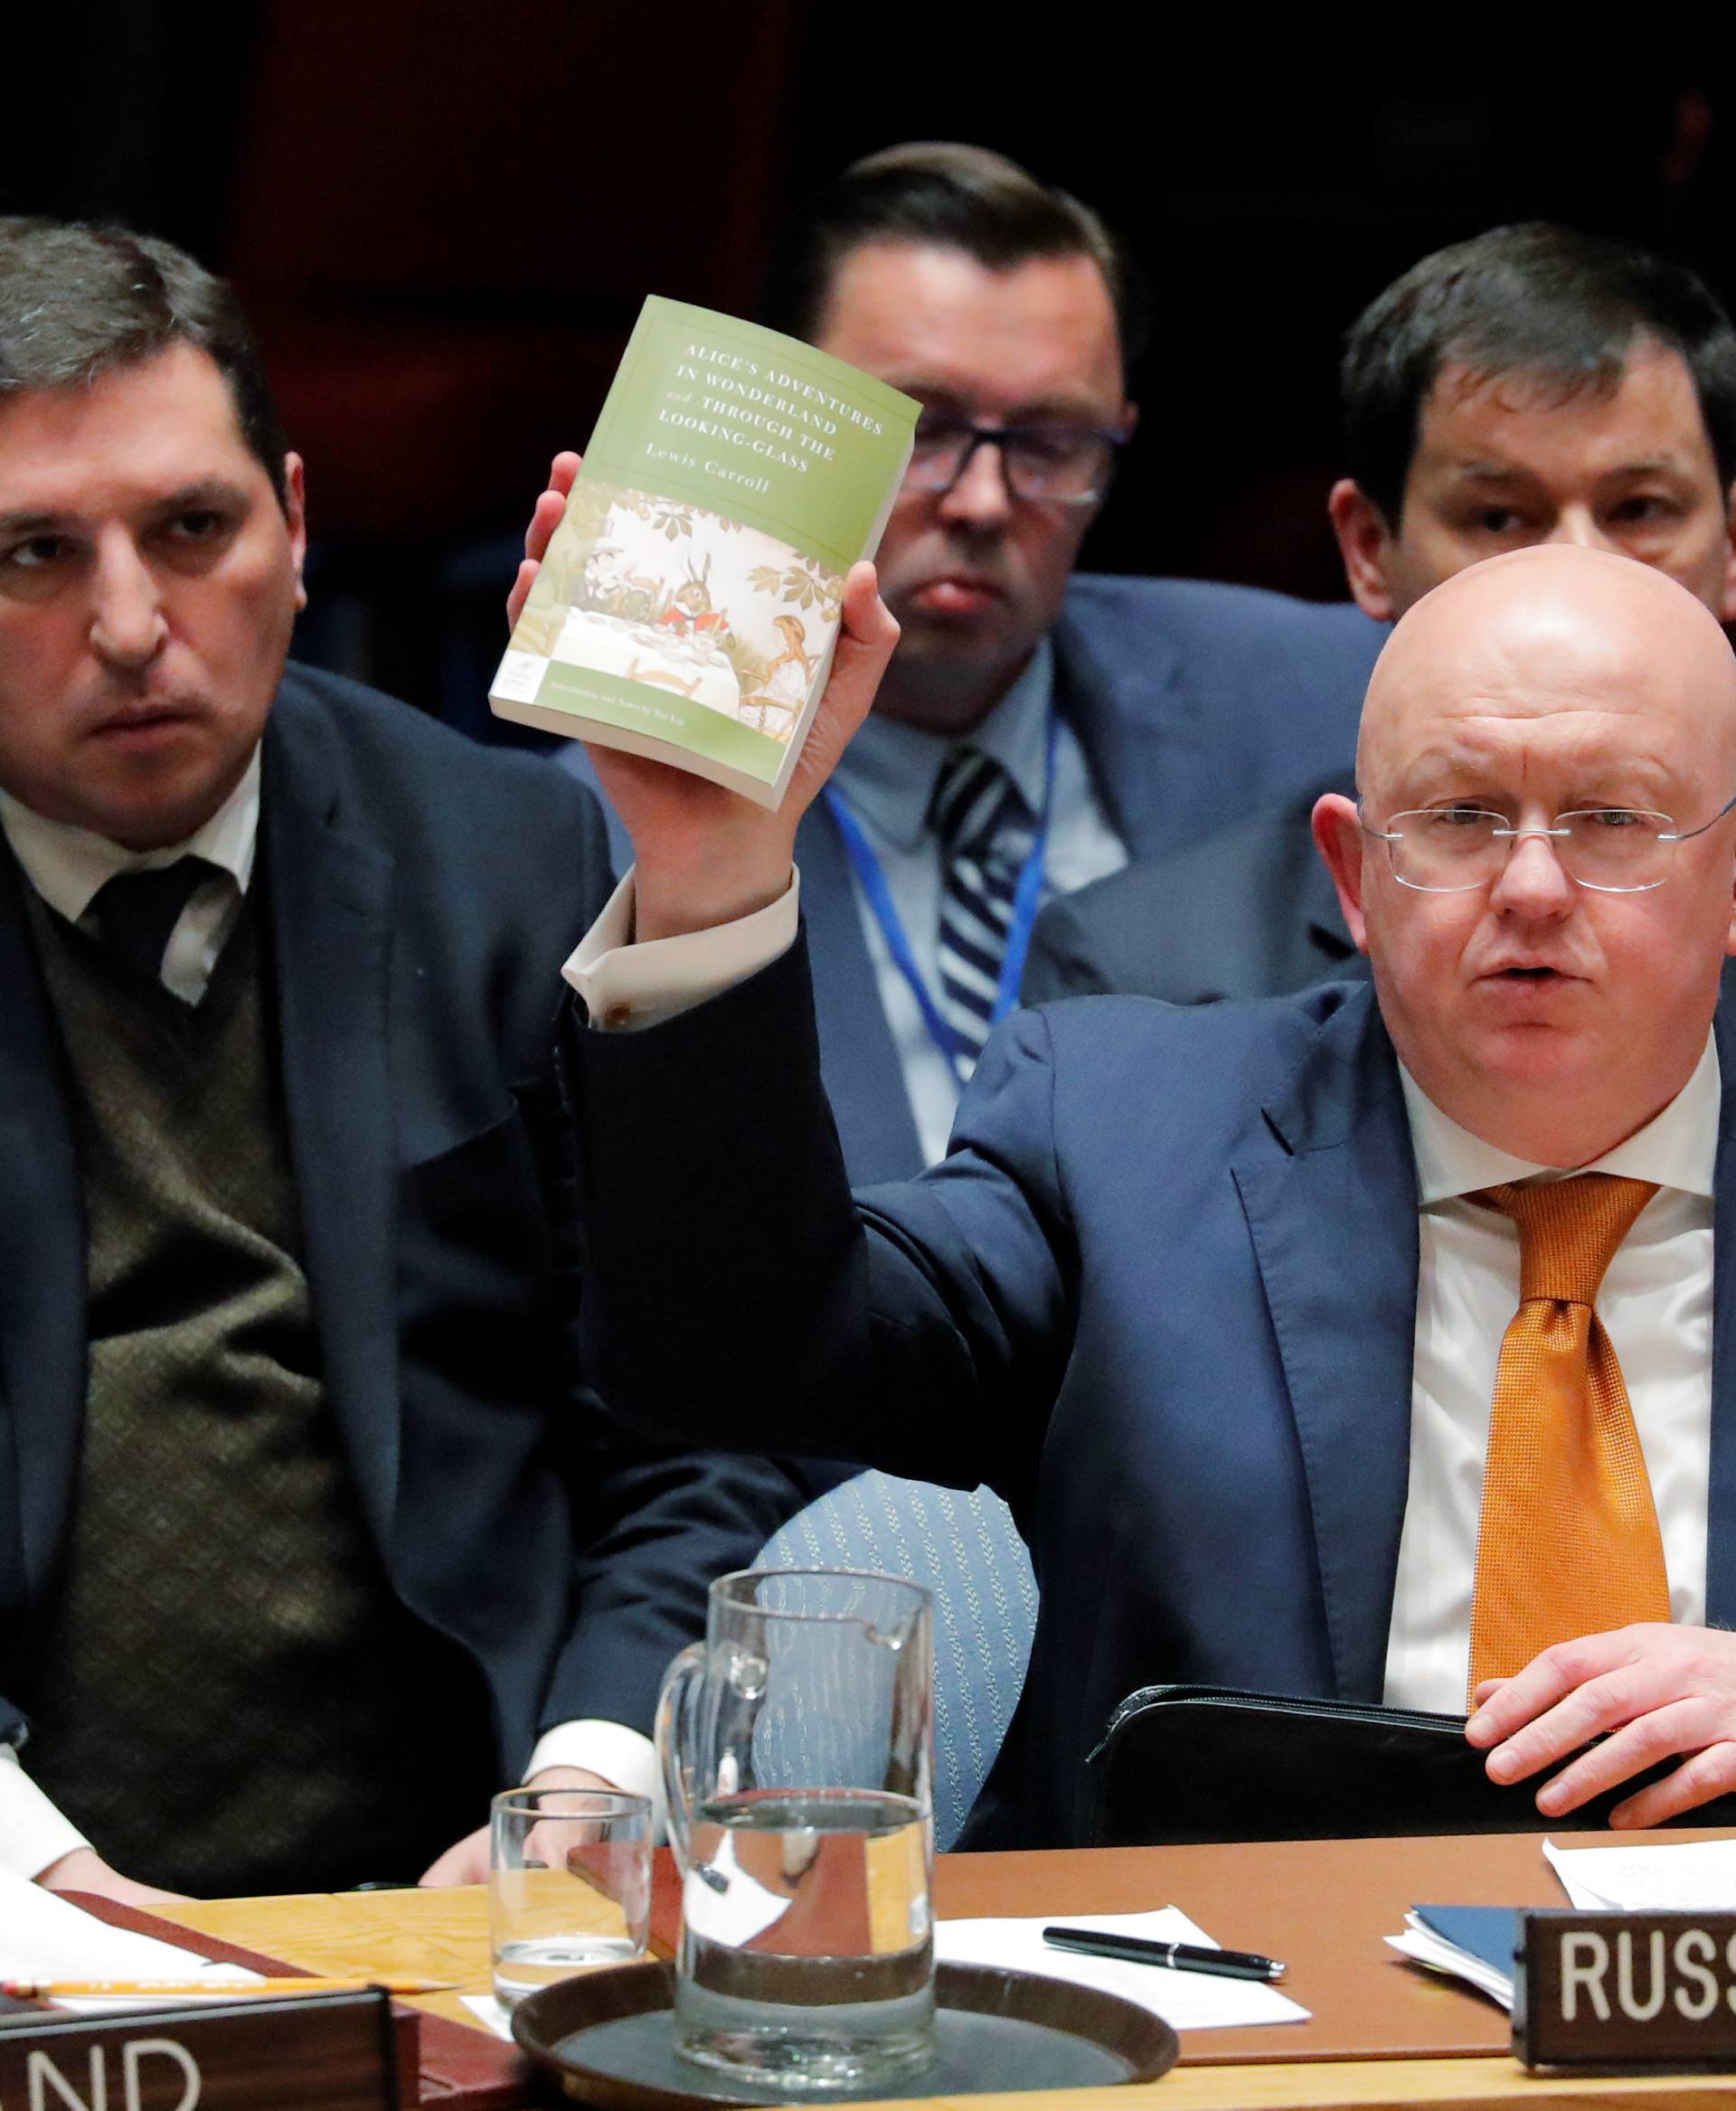 Russian Ambassador to the U.N., Nebenzya quotes from of "Alice's Adventures in Wonderland and Through the Looking Glass" as he speaks regarding an incident in Salisbury, during a meeting of the U.N. Security Council in New York